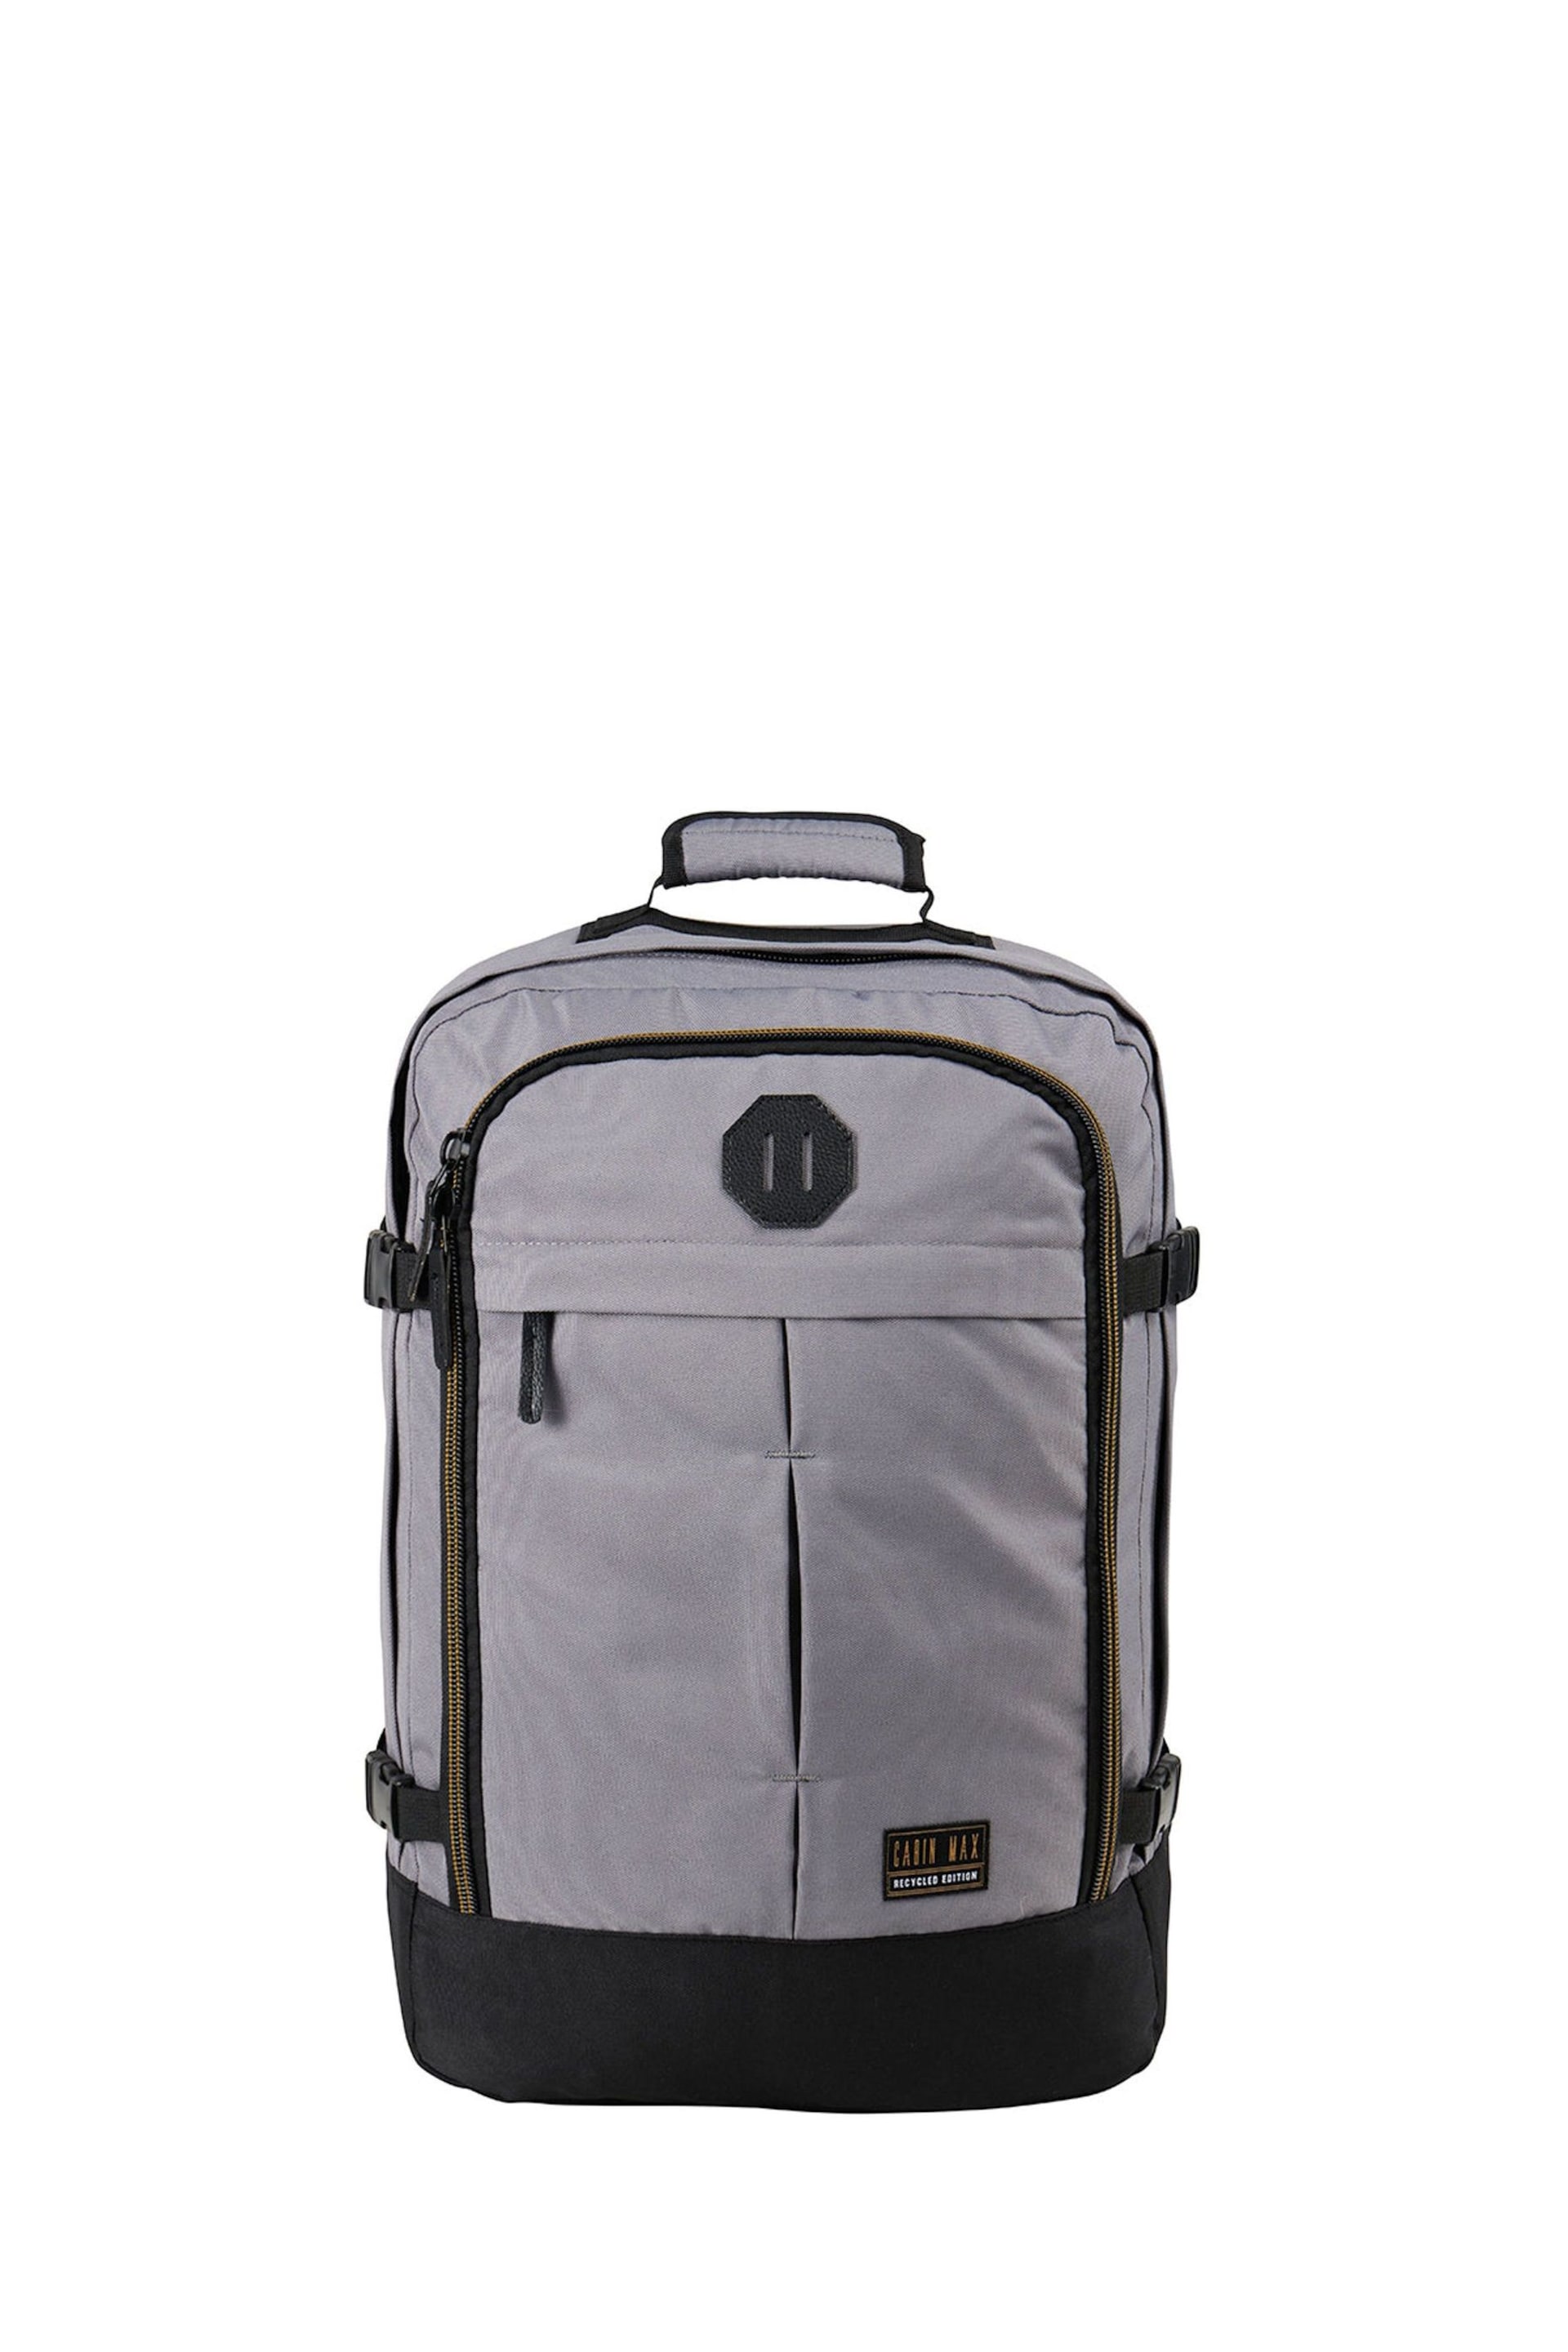 Cabin Max Metz 44L Carry On 55cm Backpack - Image 1 of 5